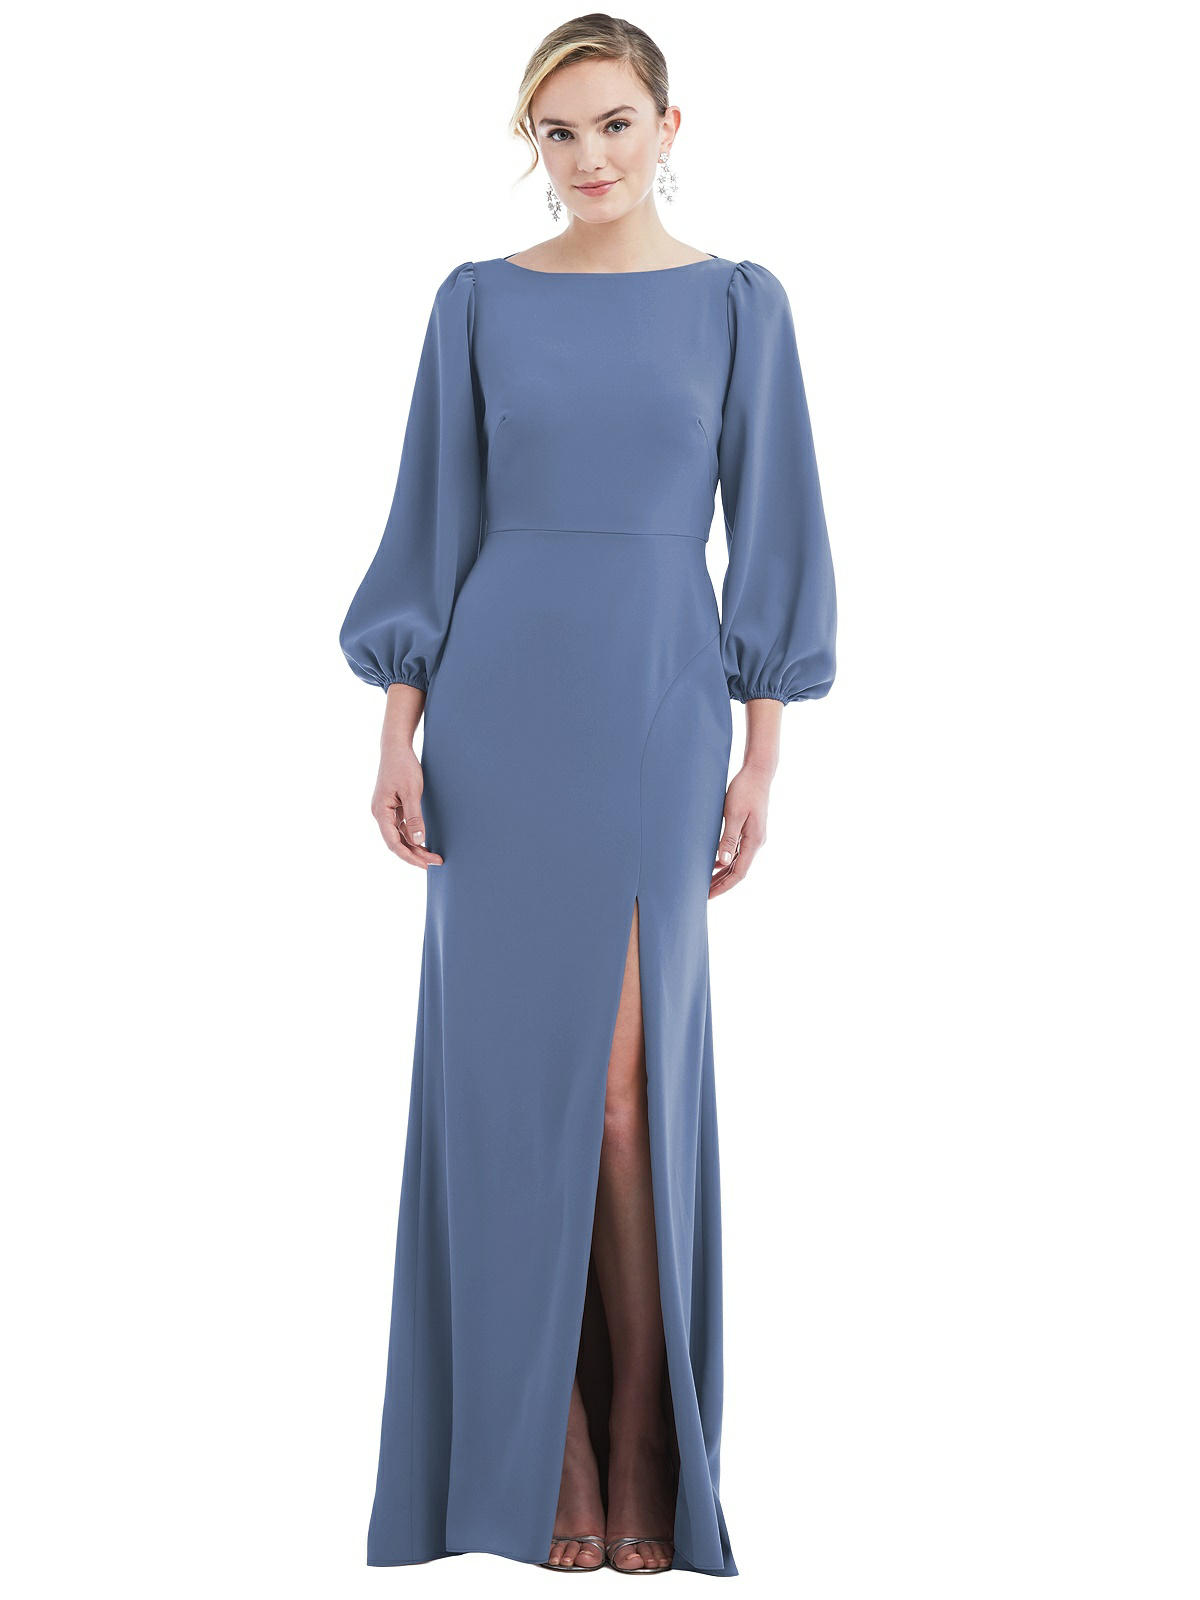 Bishop Sleeve Open-Back Trumpet Dusty Blue Bridesmaid Dress with Scarf Tie